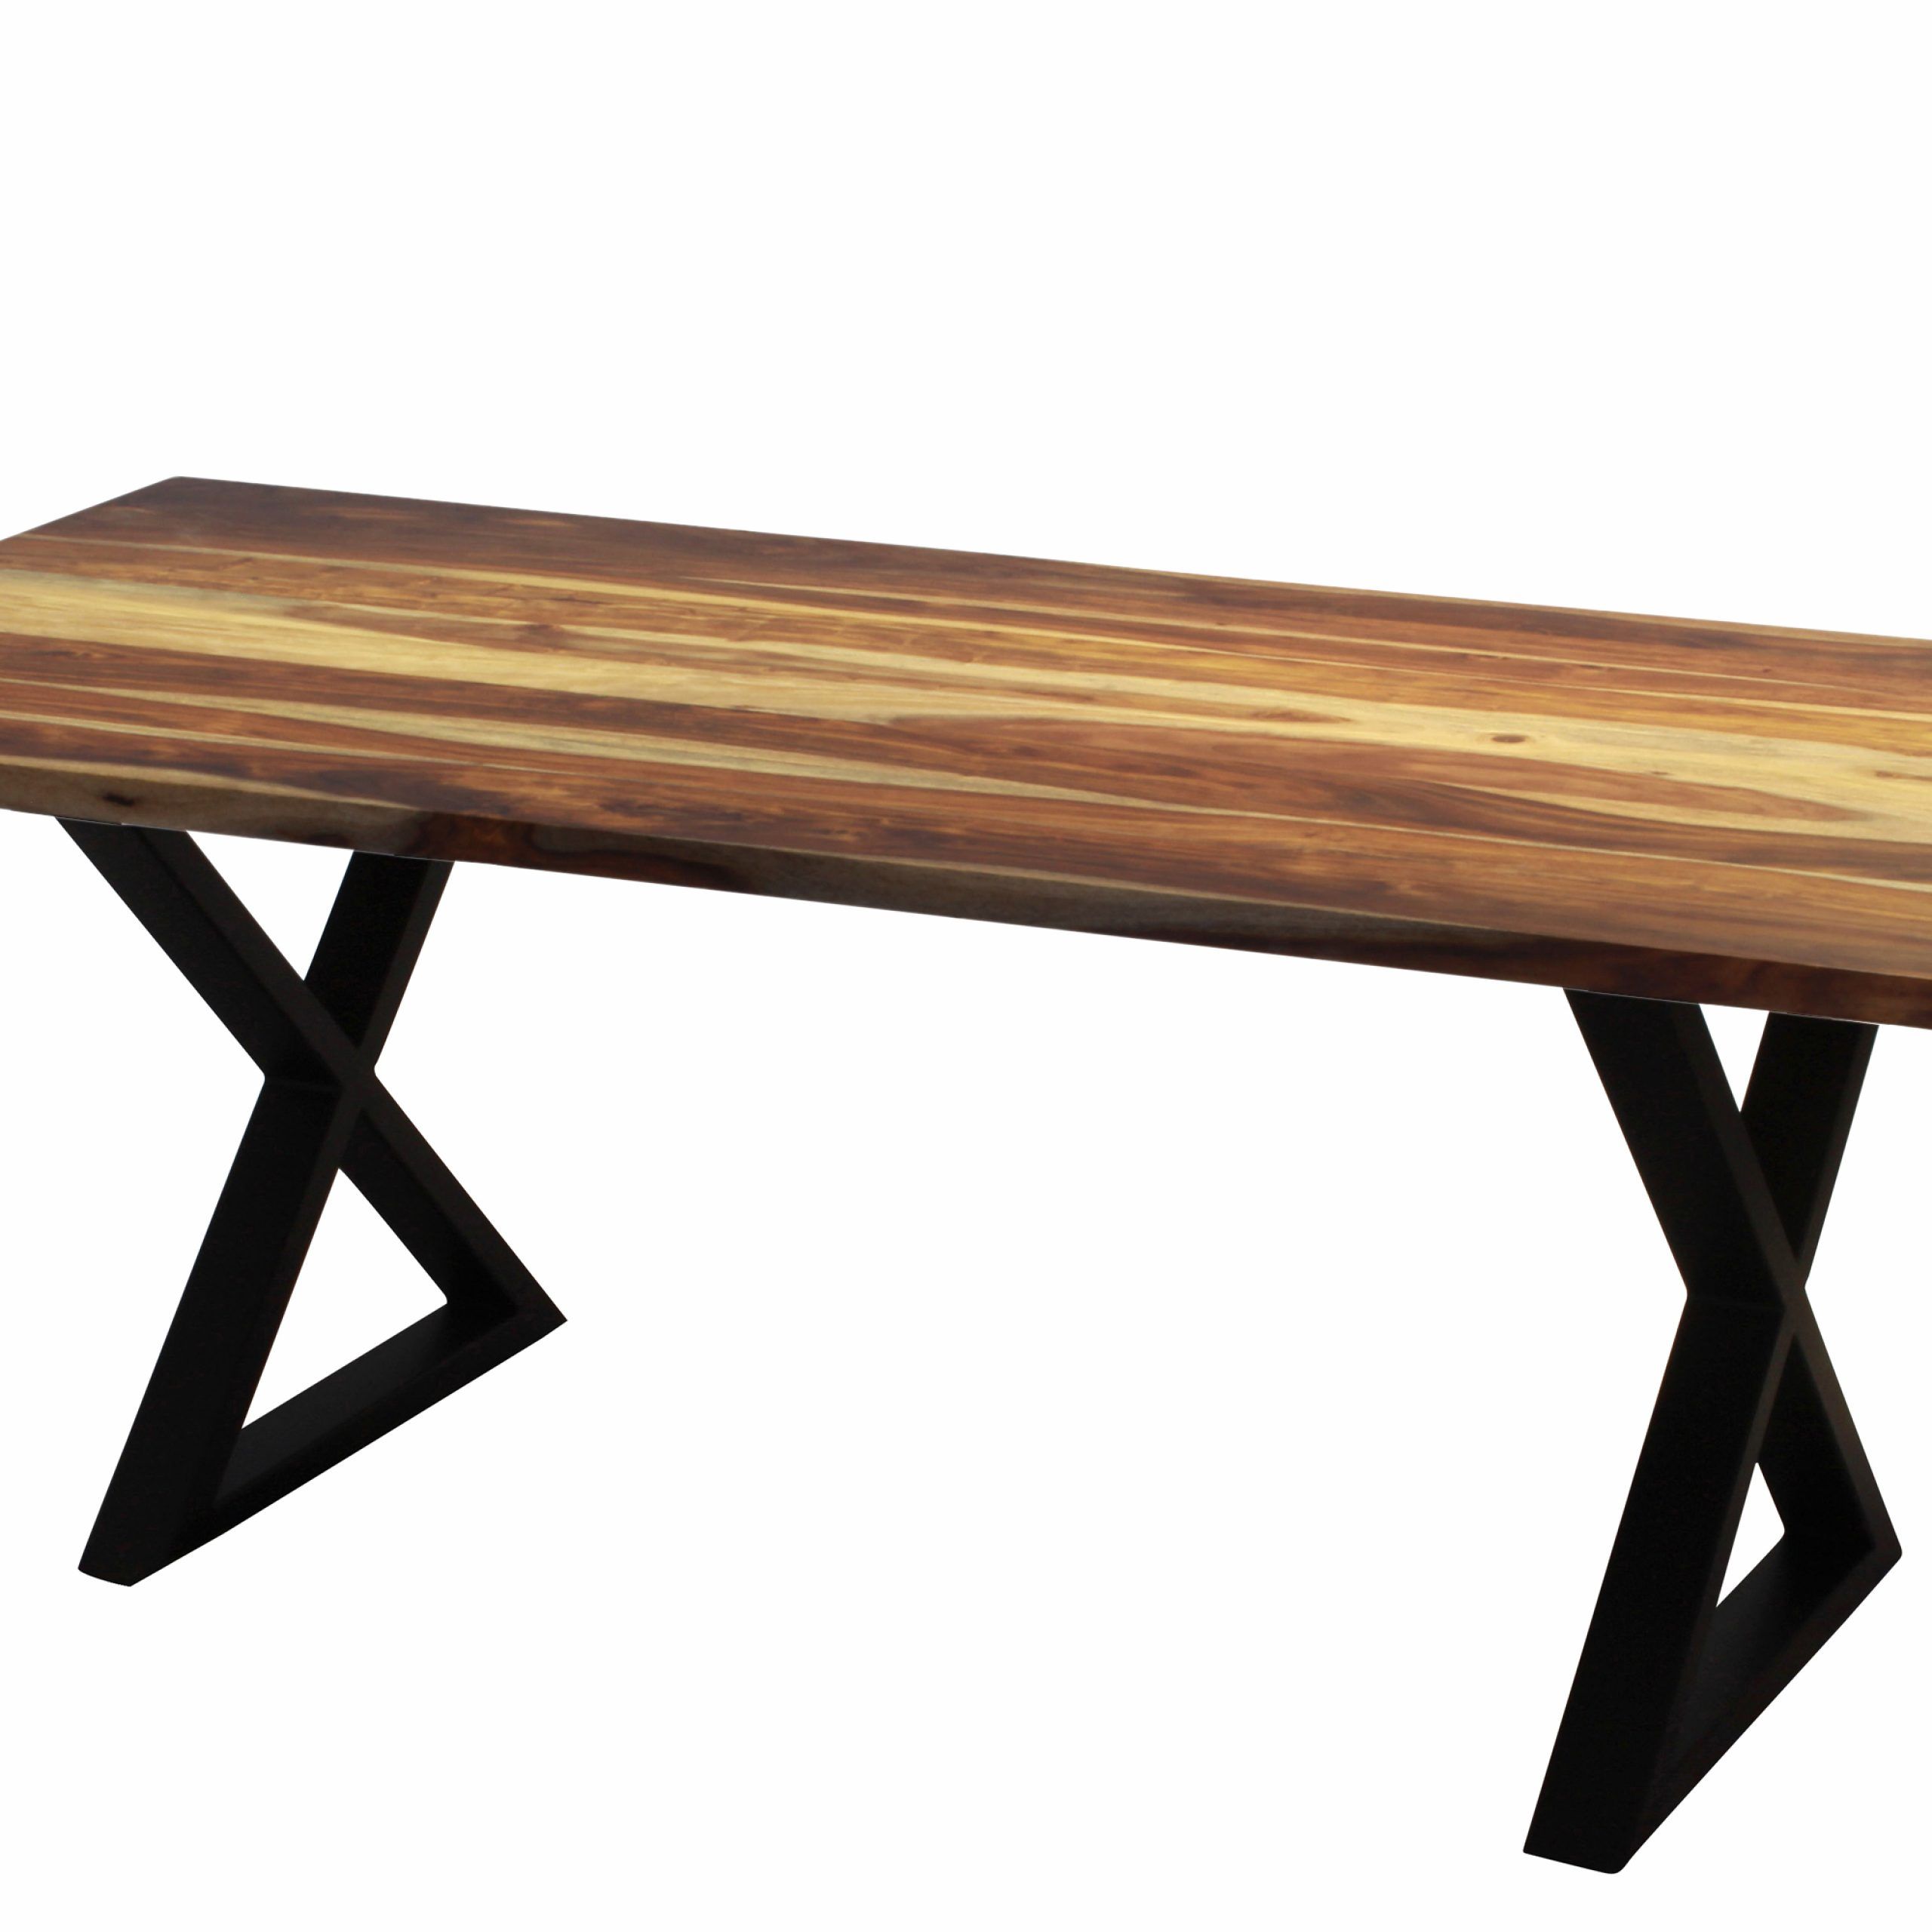 Most Popular Corcoran Acacia Live Edge Dining Table With Black Victor Legs – 96" With Regard To Acacia Dining Tables With Black Victor Legs (Photo 4 of 25)